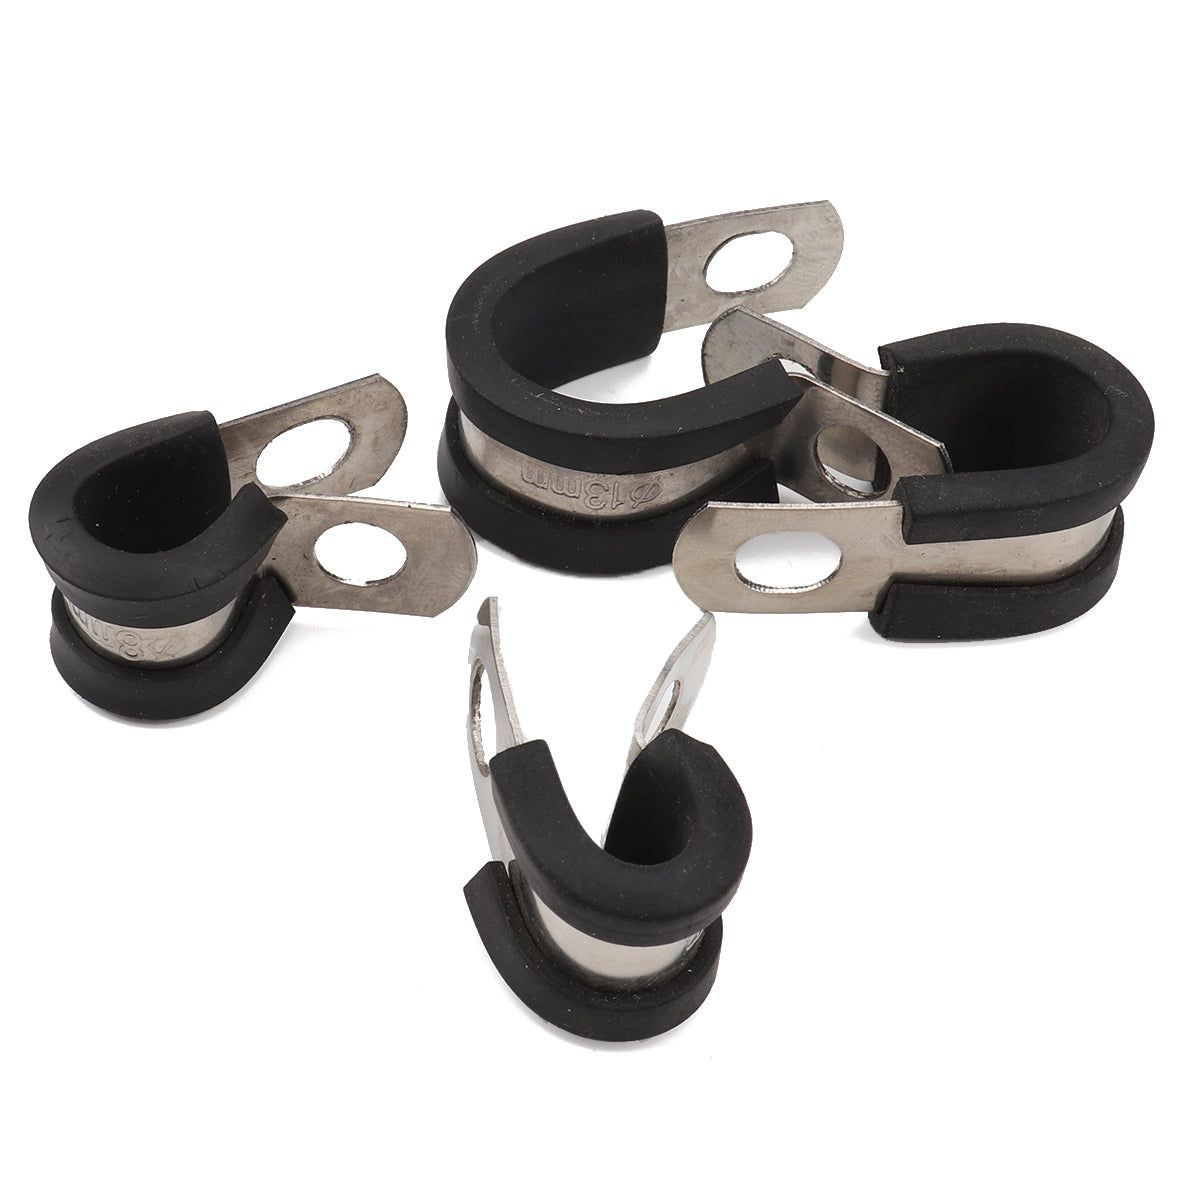 48pcs 5 Size Cable Clamp Rubber Cushion Insulated Clamp Stainless Steel Metal Clamp ZopiStyle